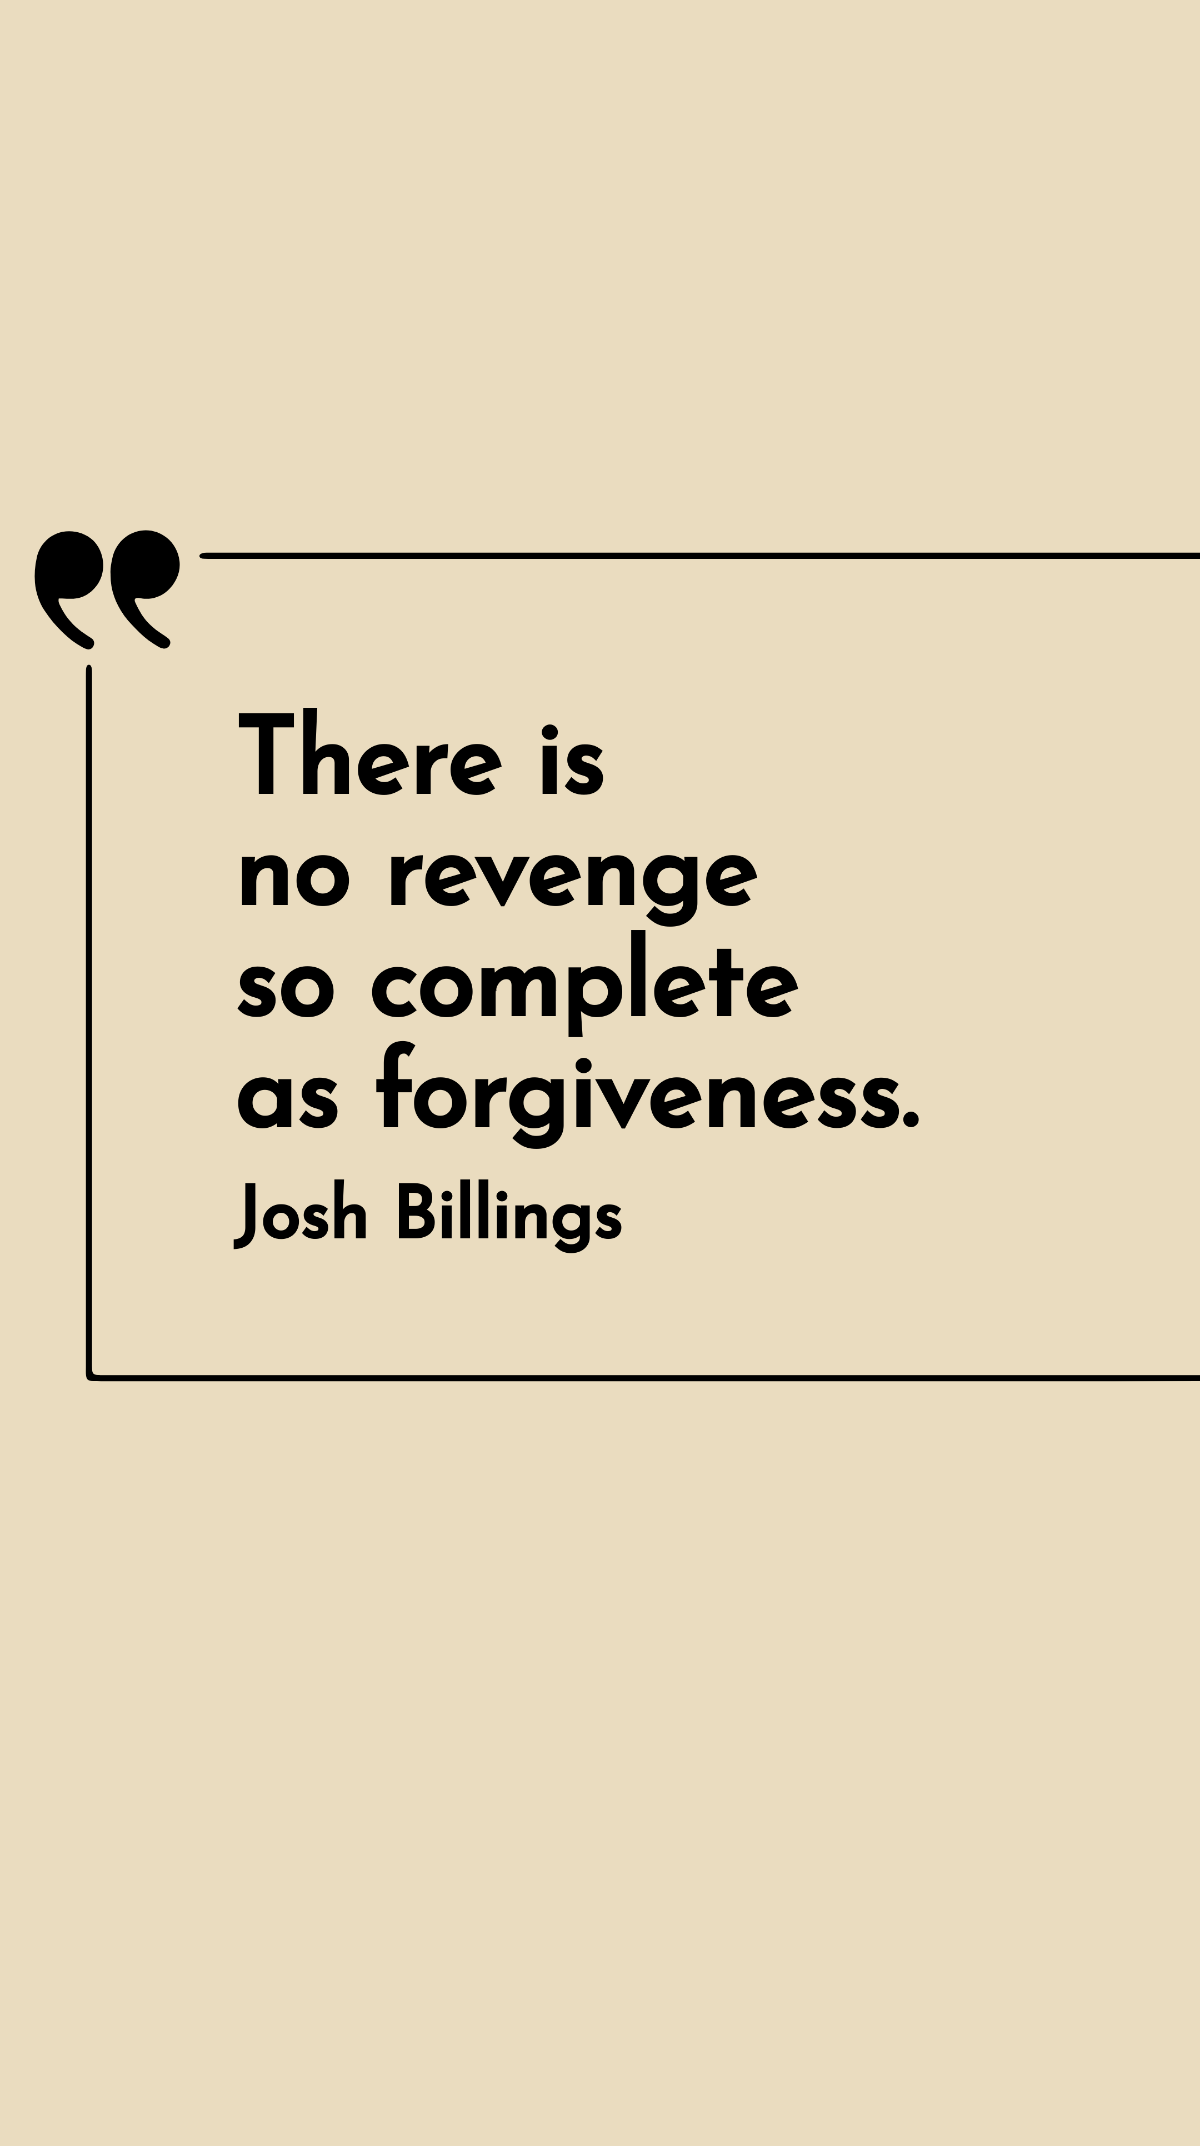 Free Josh Billings - There is no revenge so complete as forgiveness. Template